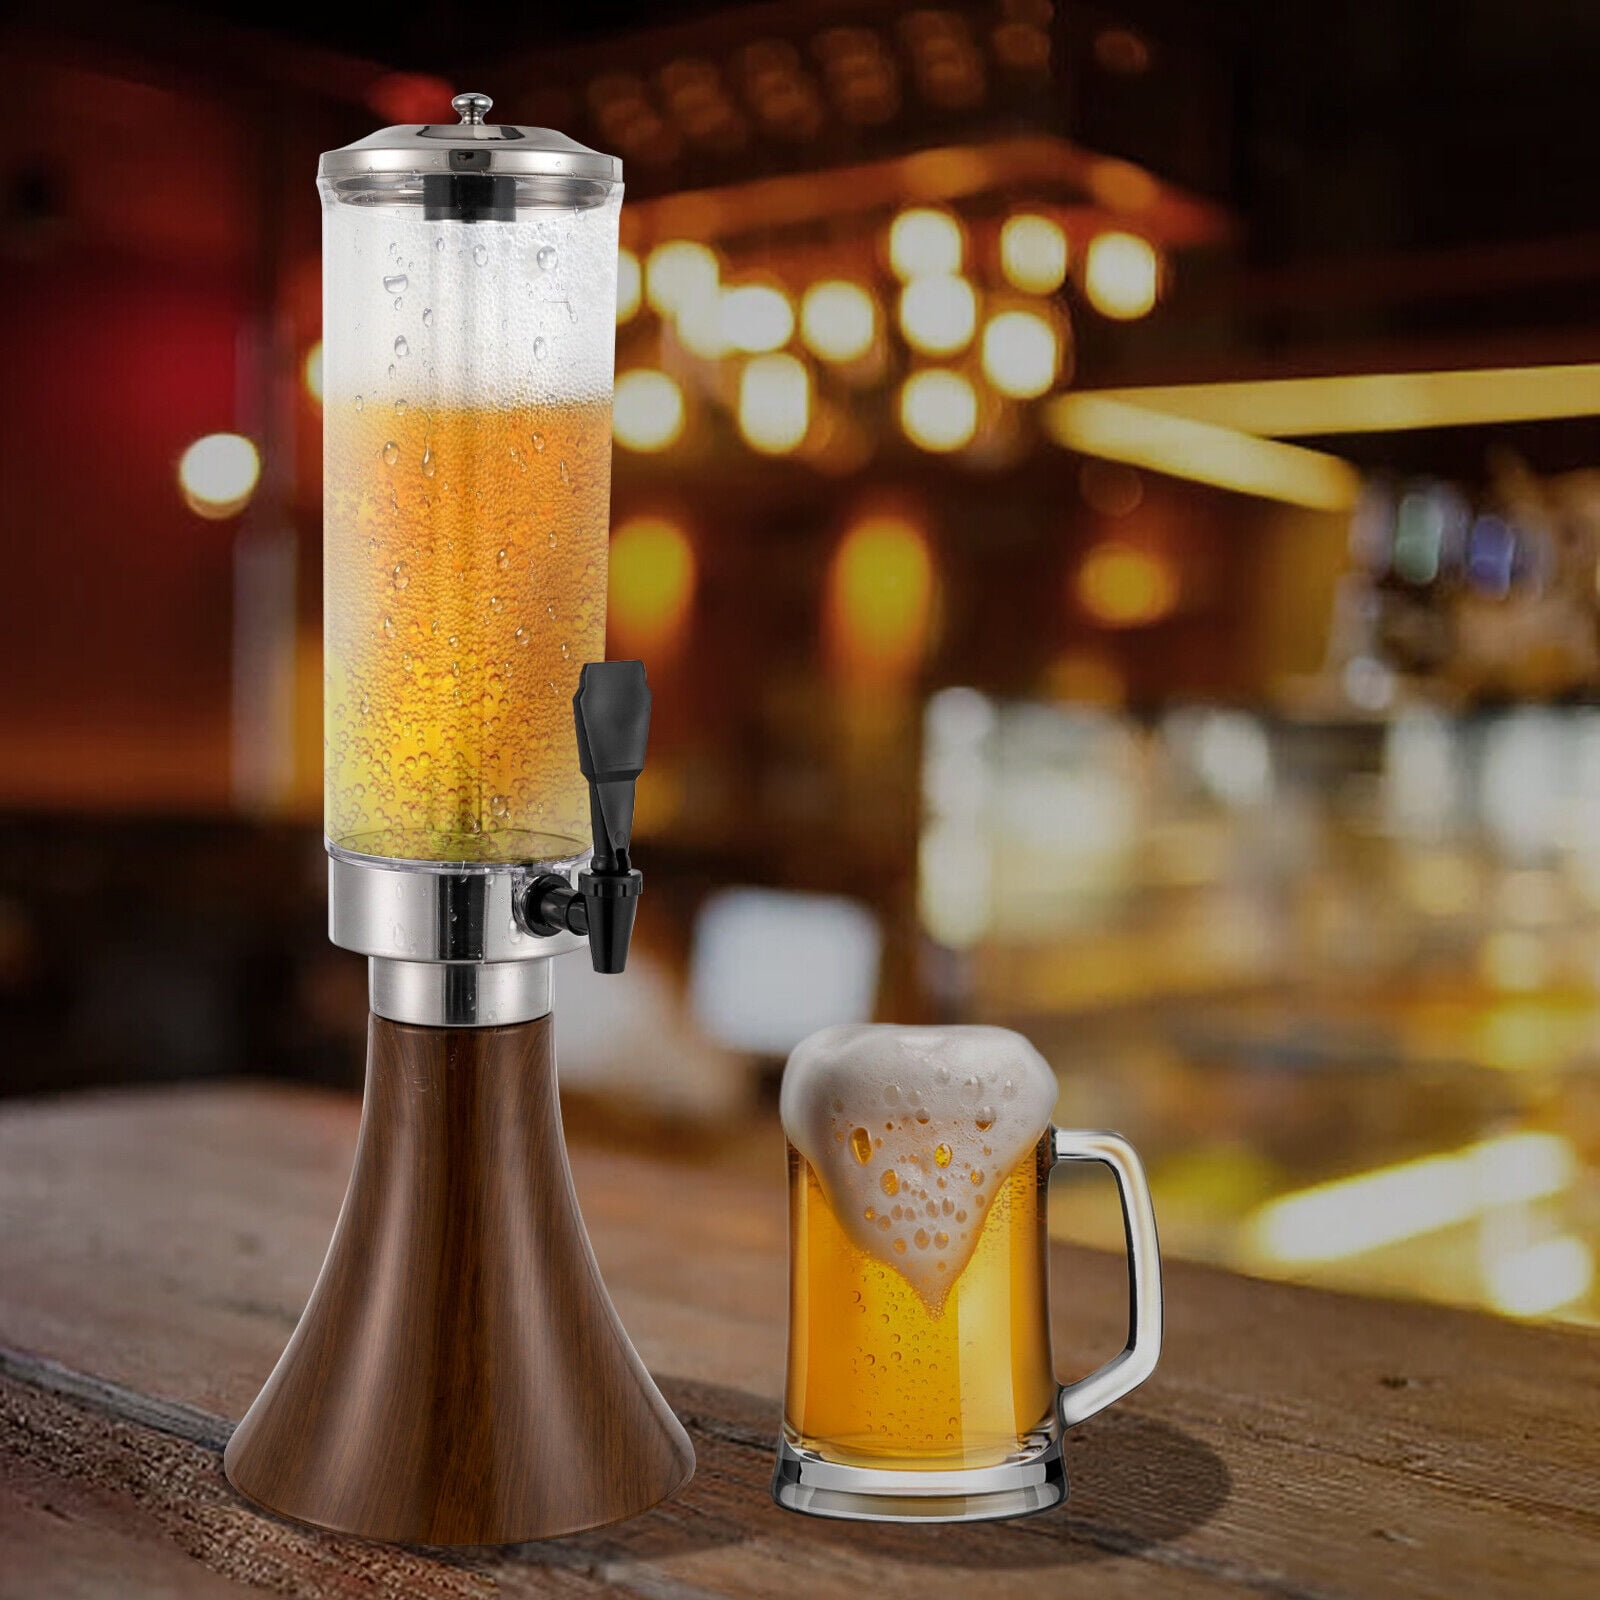 Miumaeov Mimosa Tower Beer Tower with Ice Tube and LED Light Tabletop Beer Tower Dispenser for Parties Bars Clubhouses, Size: Large, Gold